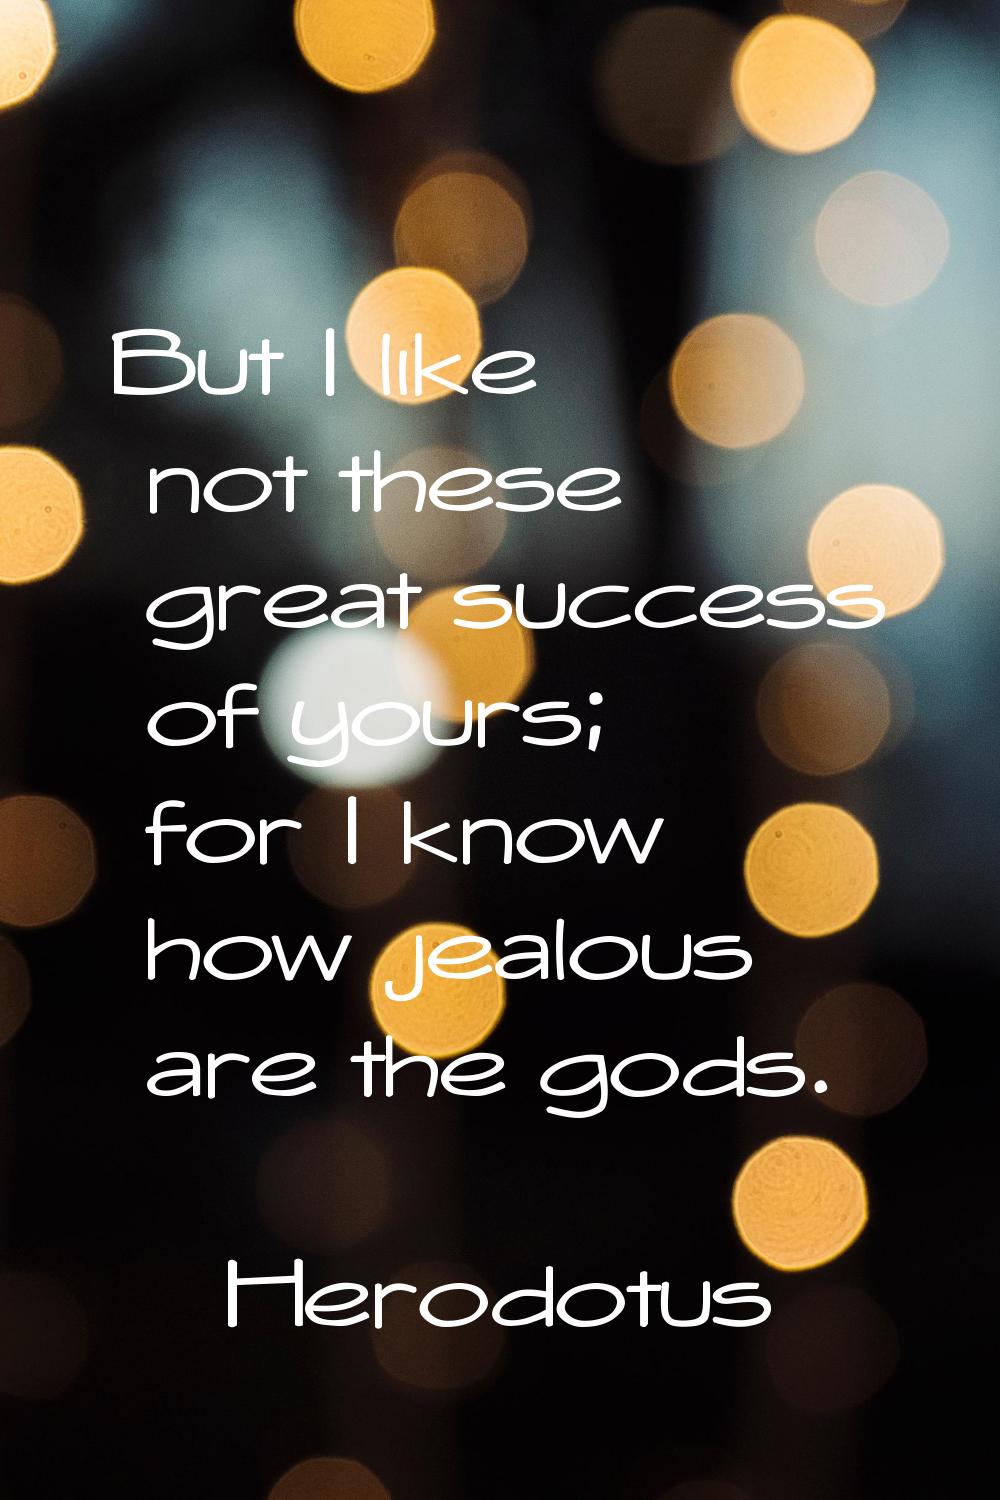 But I like not these great success of yours; for I know how jealous are the gods.